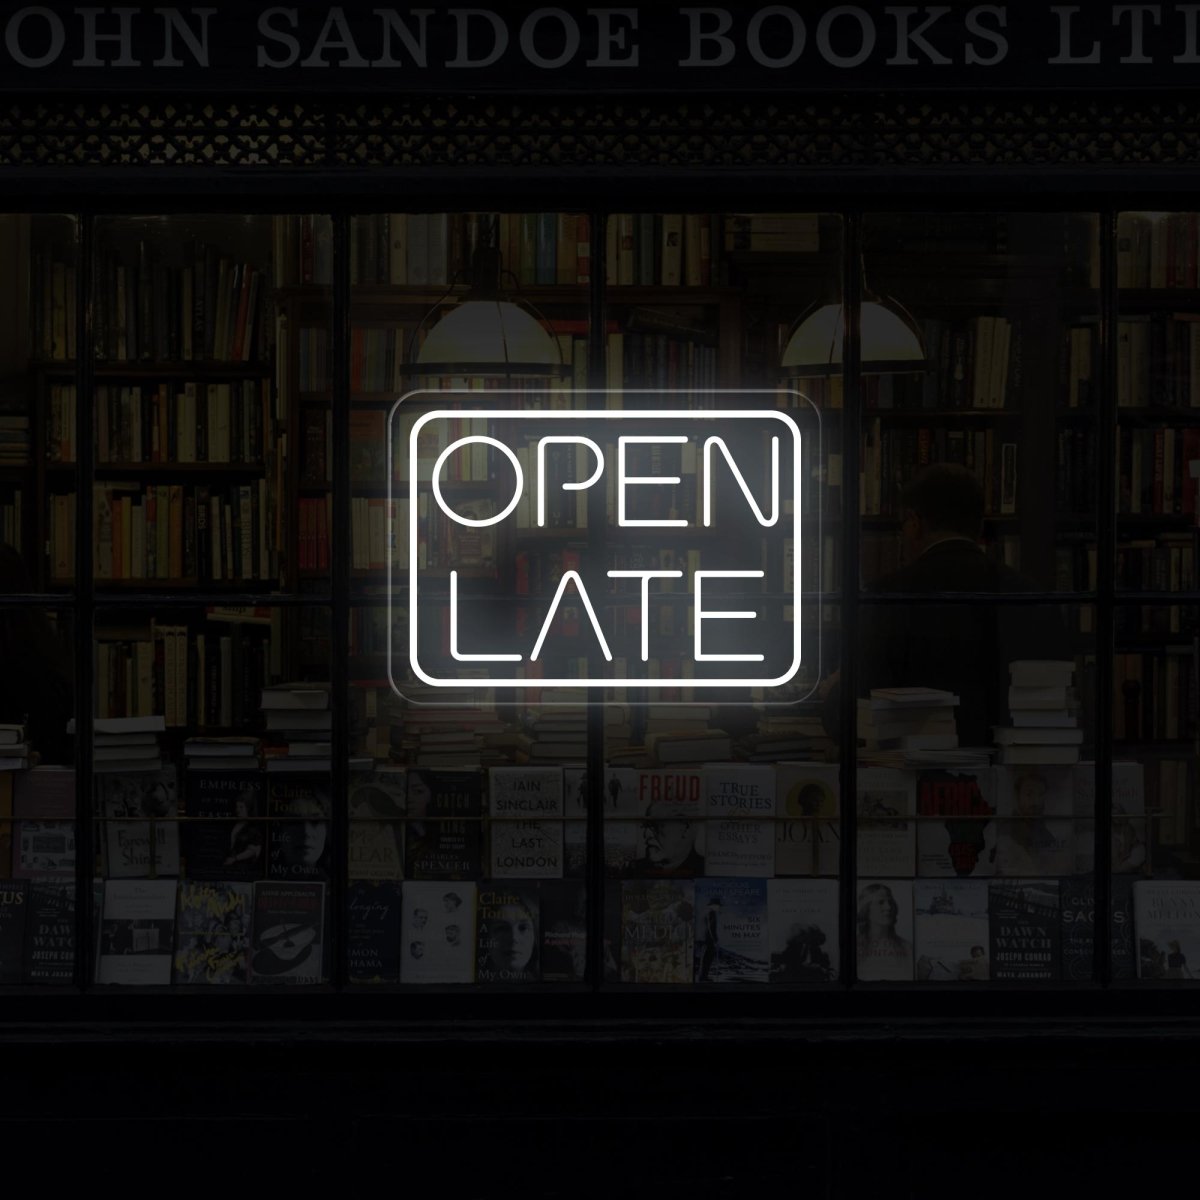 Open Late Neon Sign | LED Light Up Sign For Business - NEONXPERT